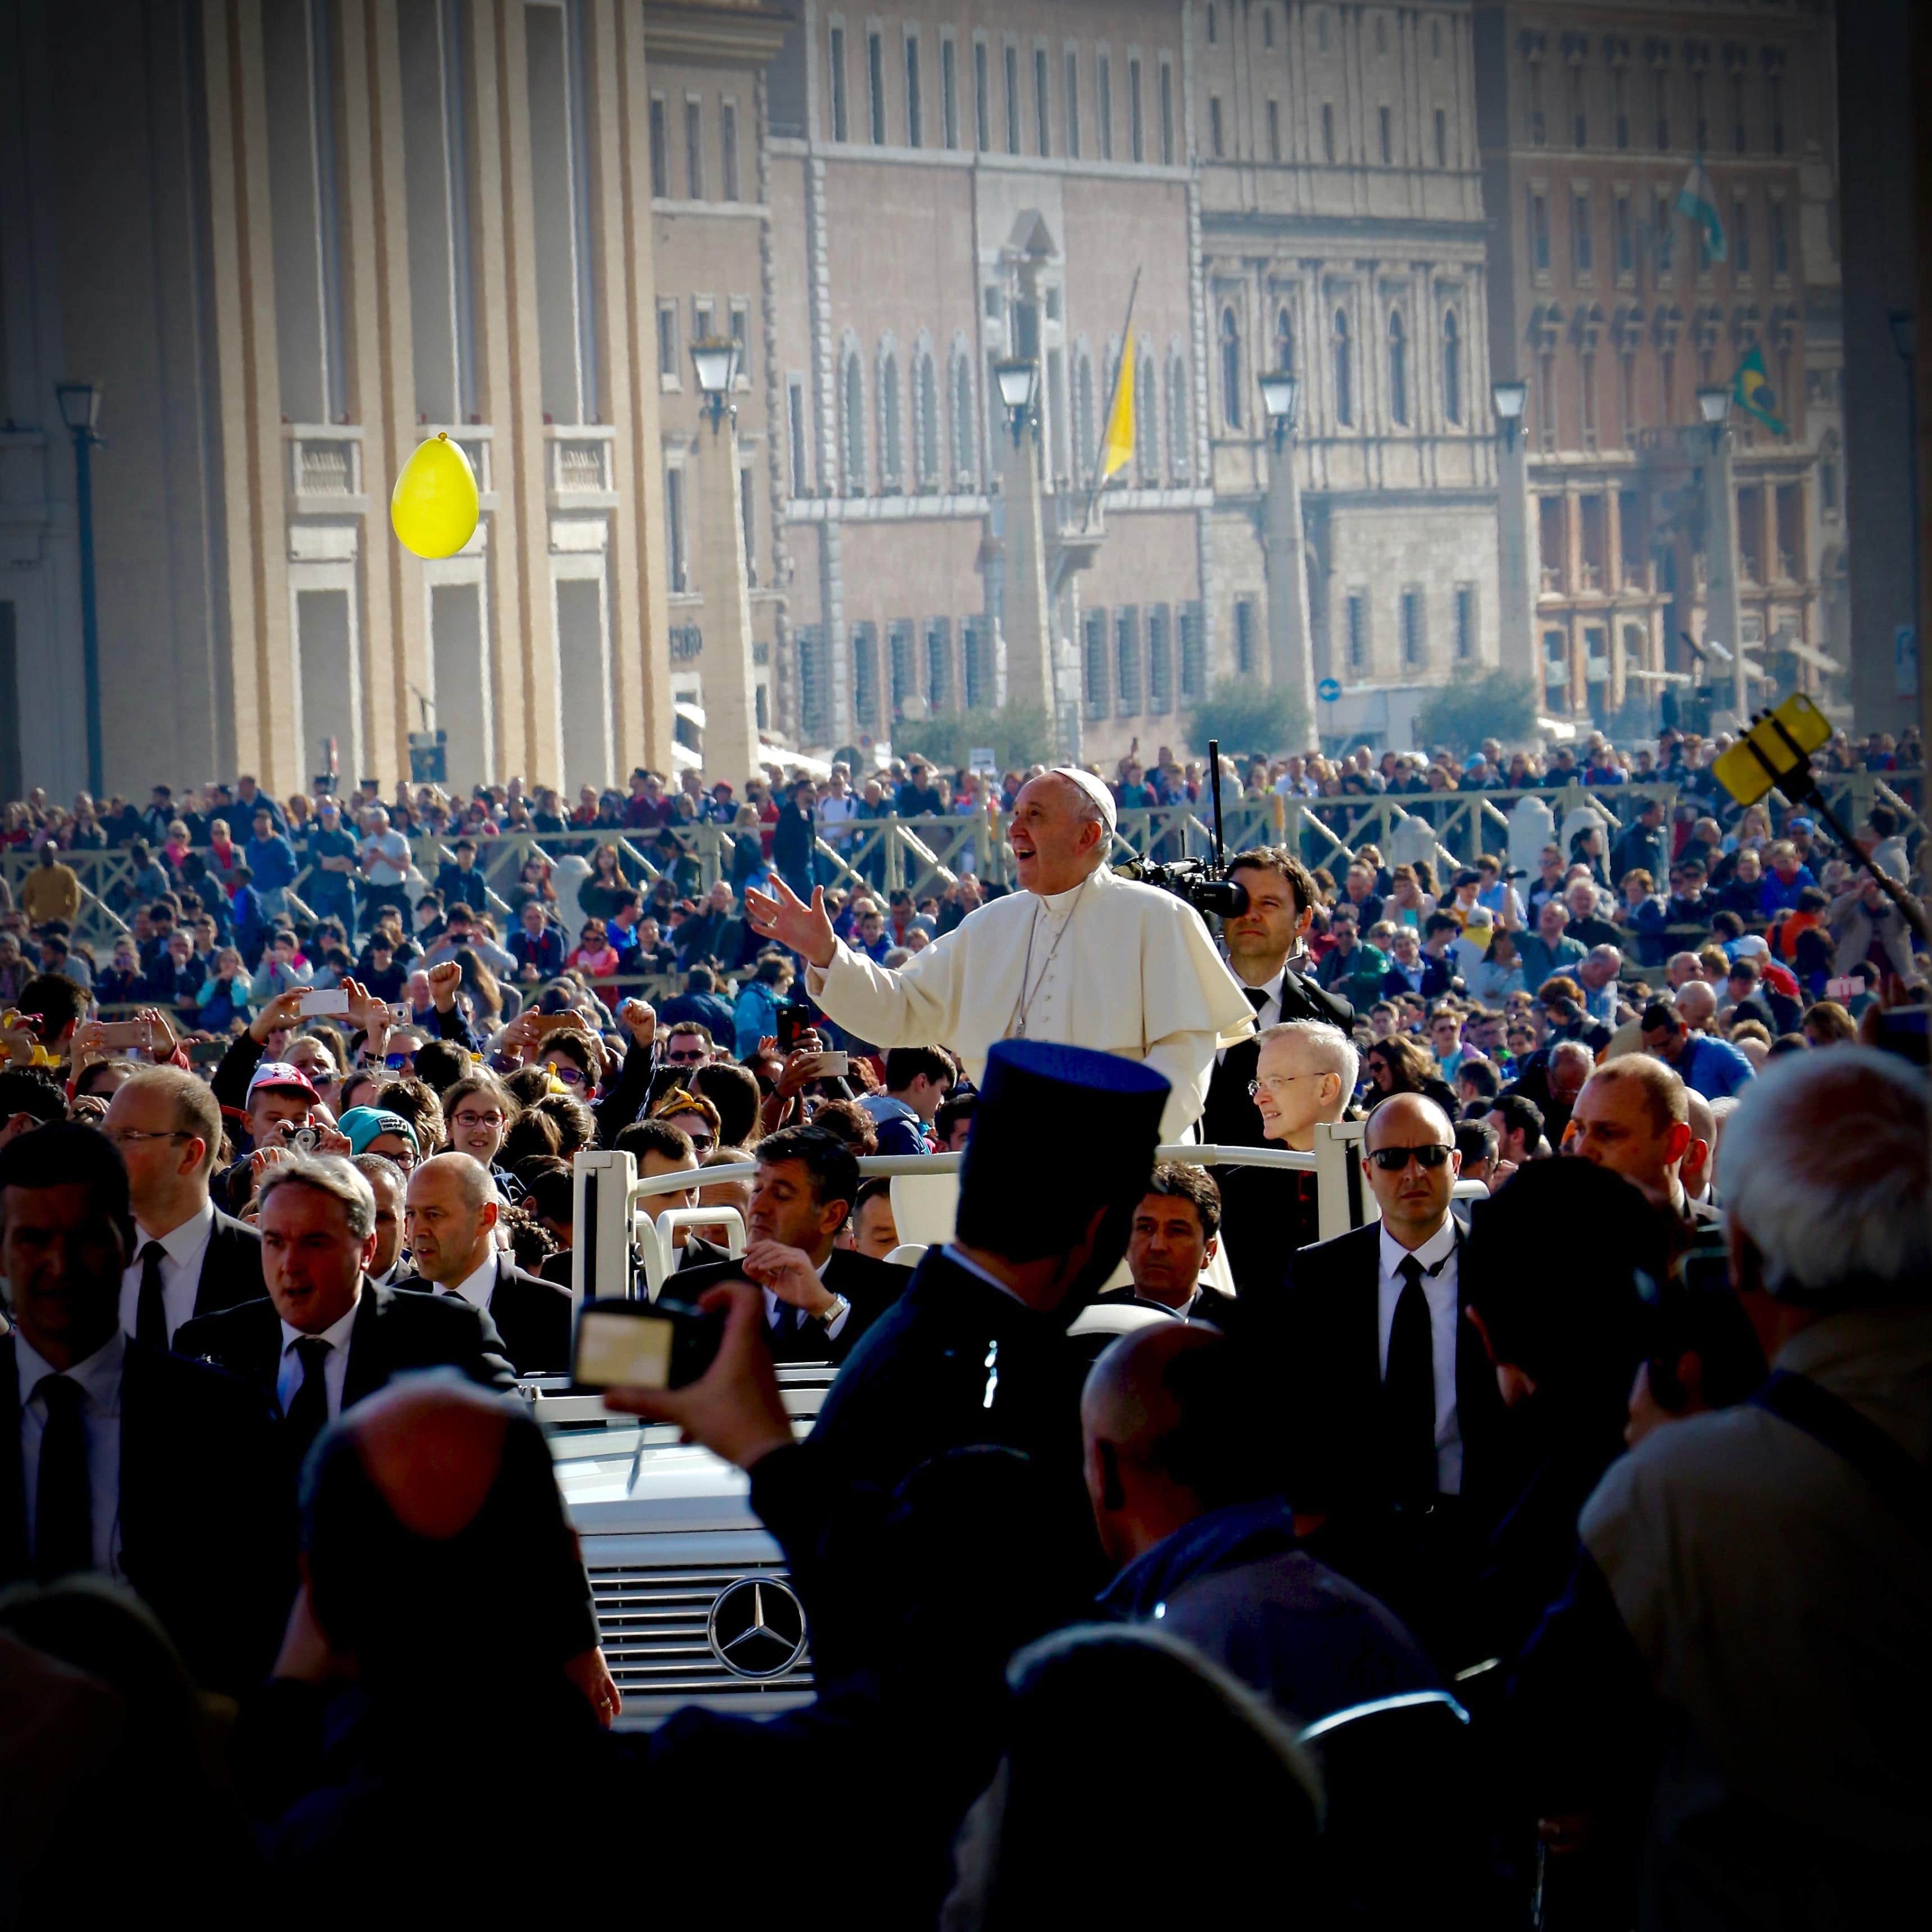 Pope Francis with a yellow balloon at the Papal Audience at the Vatican